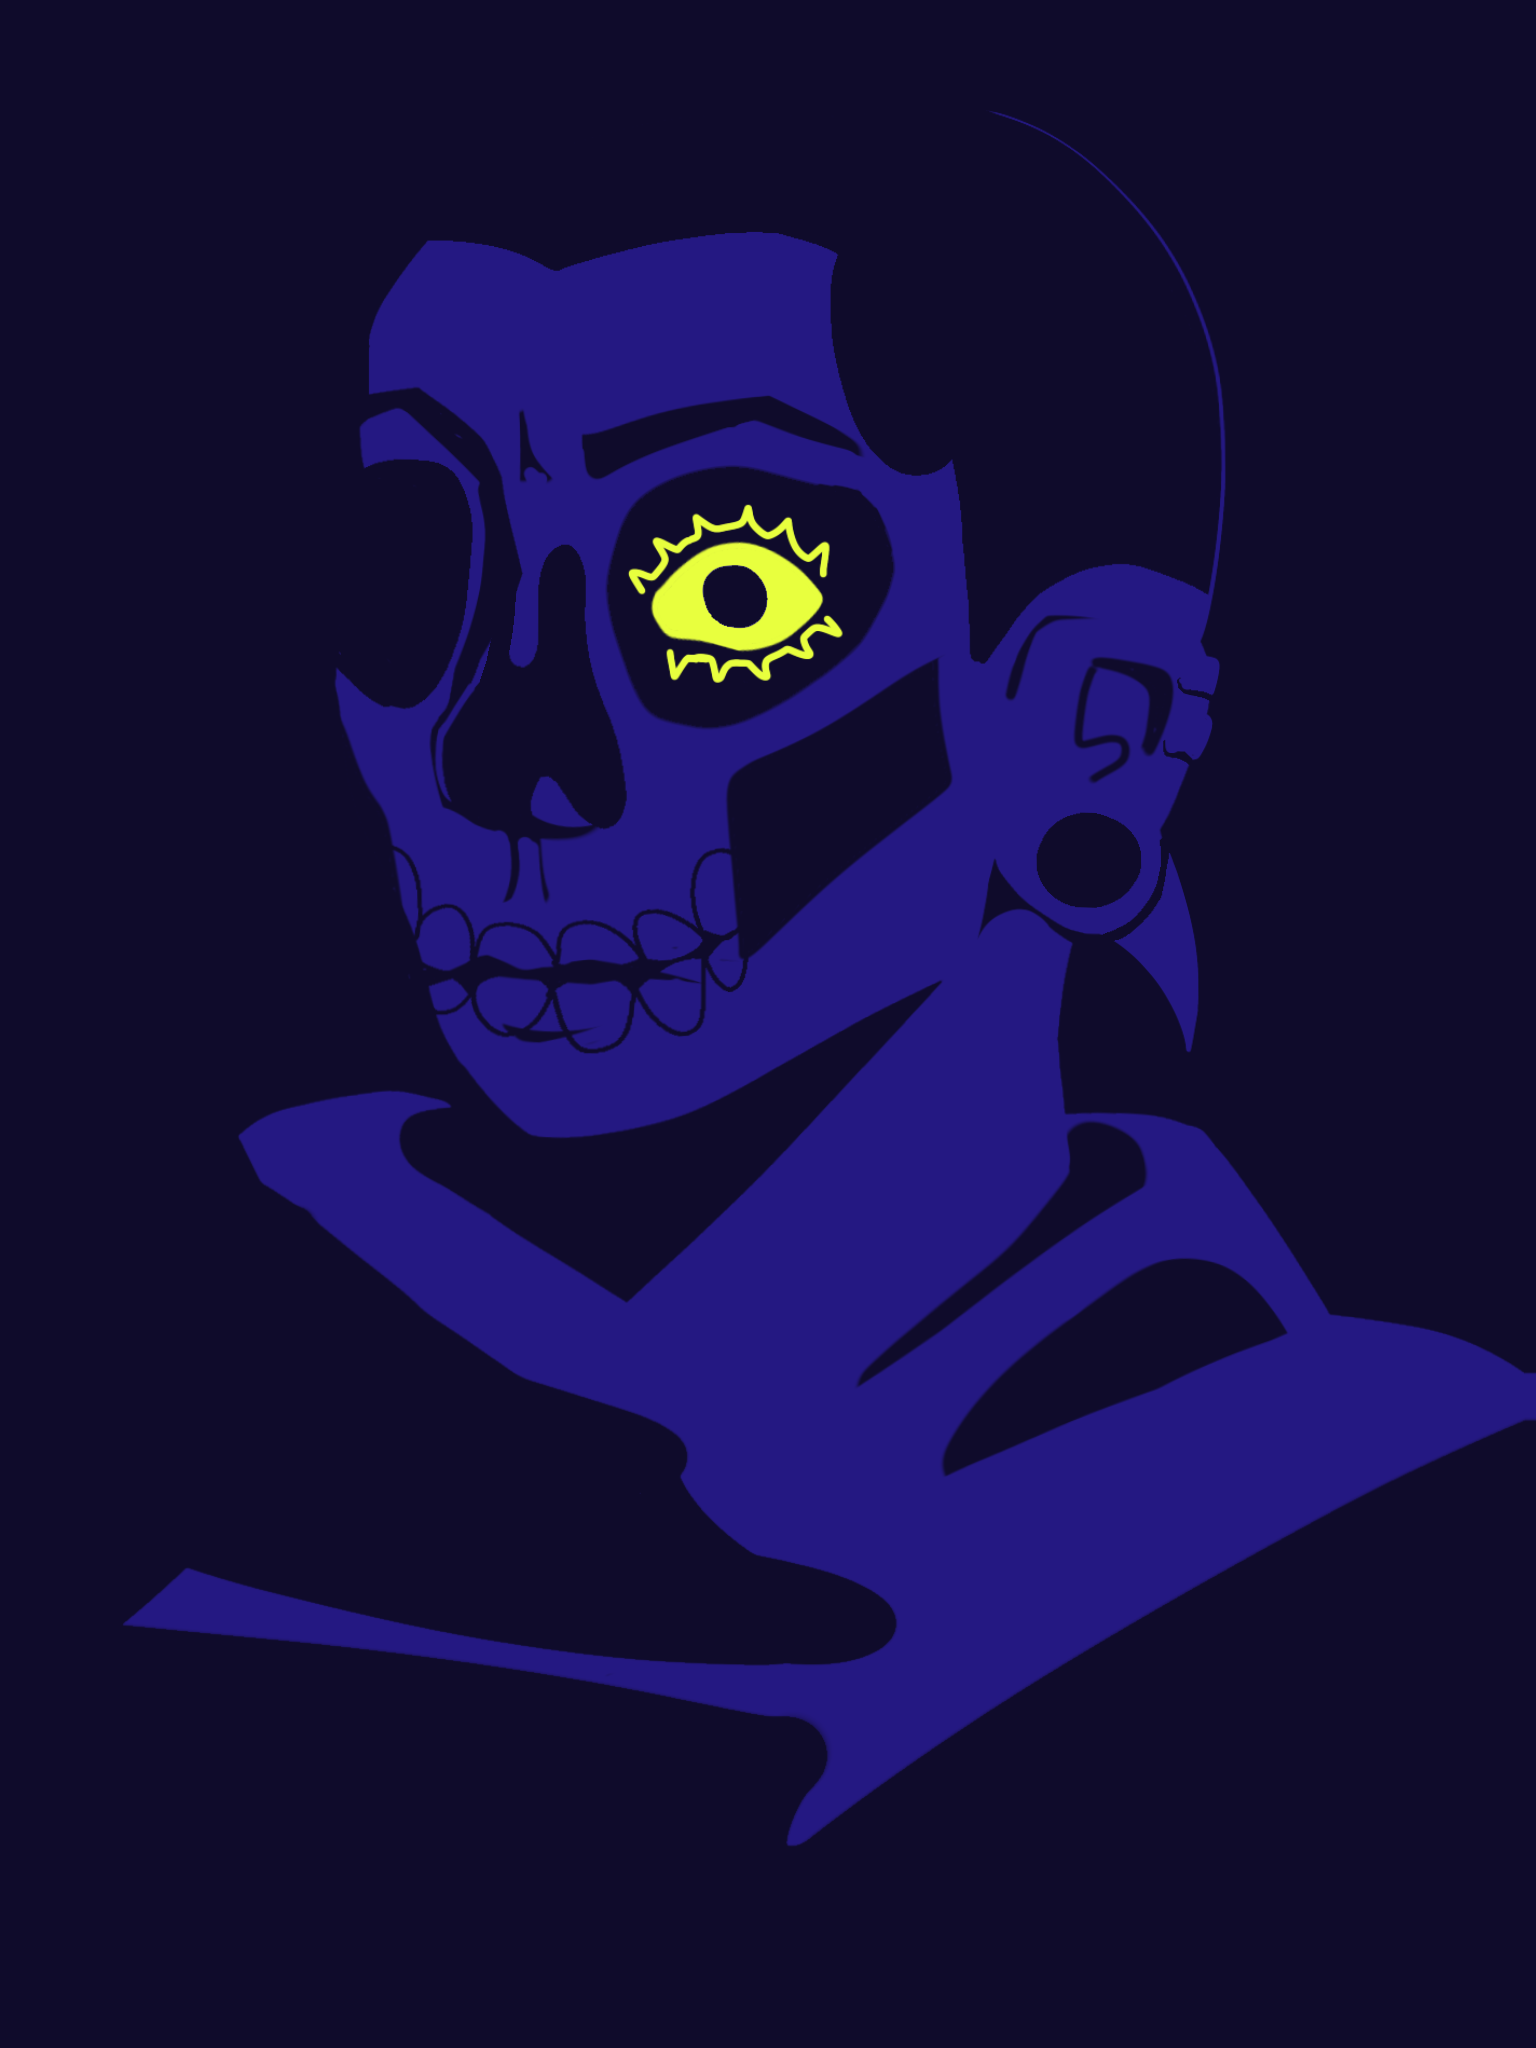 lineless, limited palette bust of harrow, using blue, dark blue, and yellow